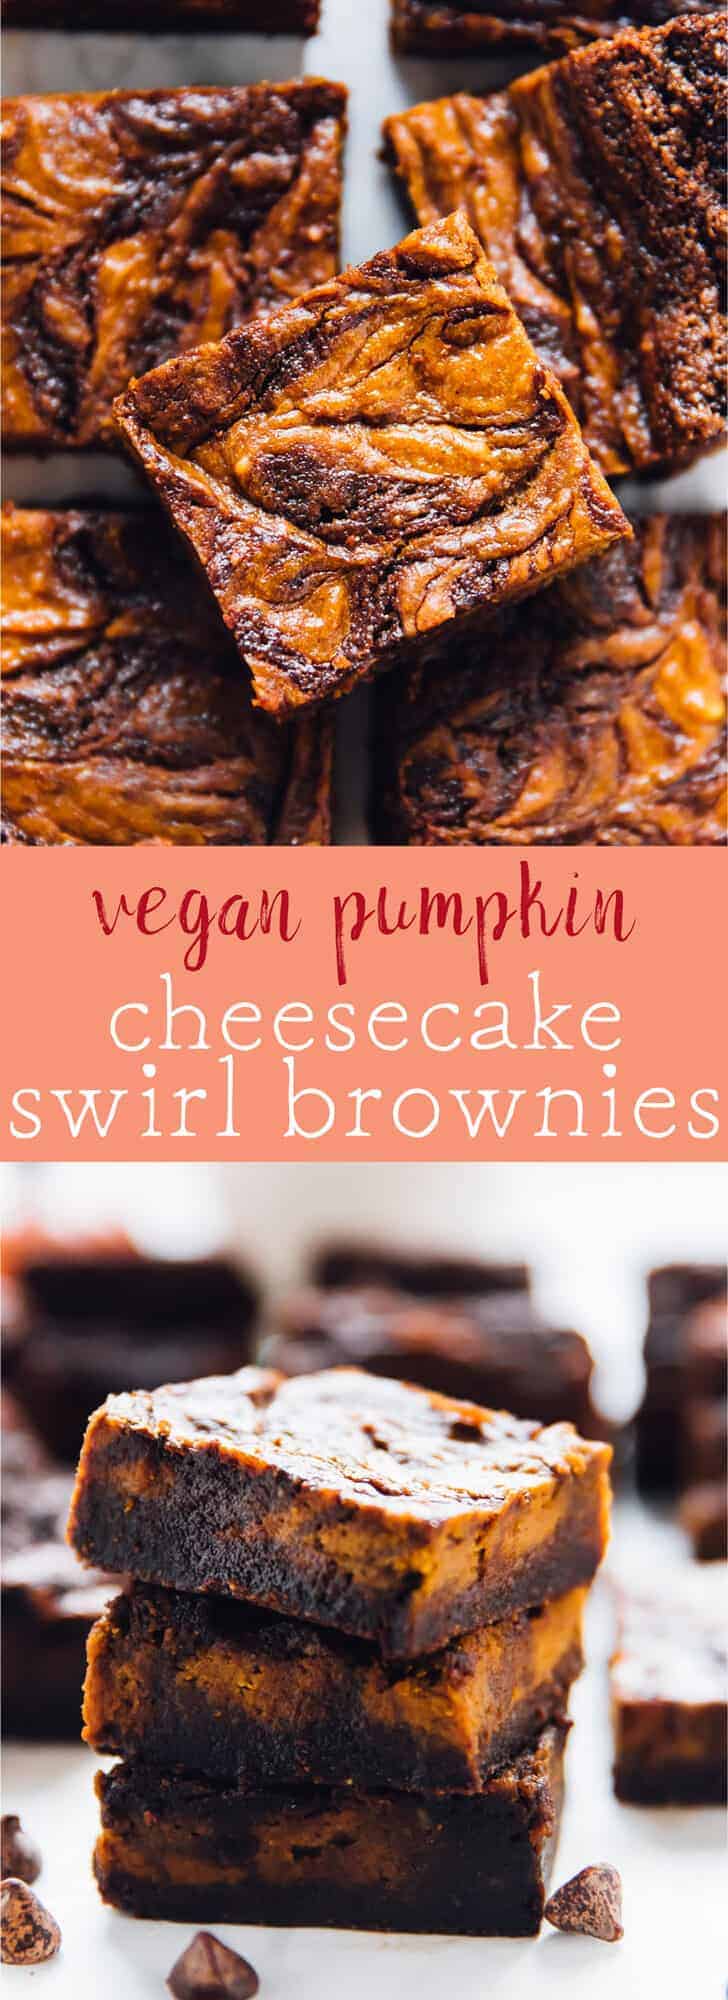 These Vegan Pumpkin Cheesecake Swirl Brownies will amaze your tastebuds and your guests!! They taste fantastic, are gluten free and are so easy to make! via https://jessicainthekitchen.com 